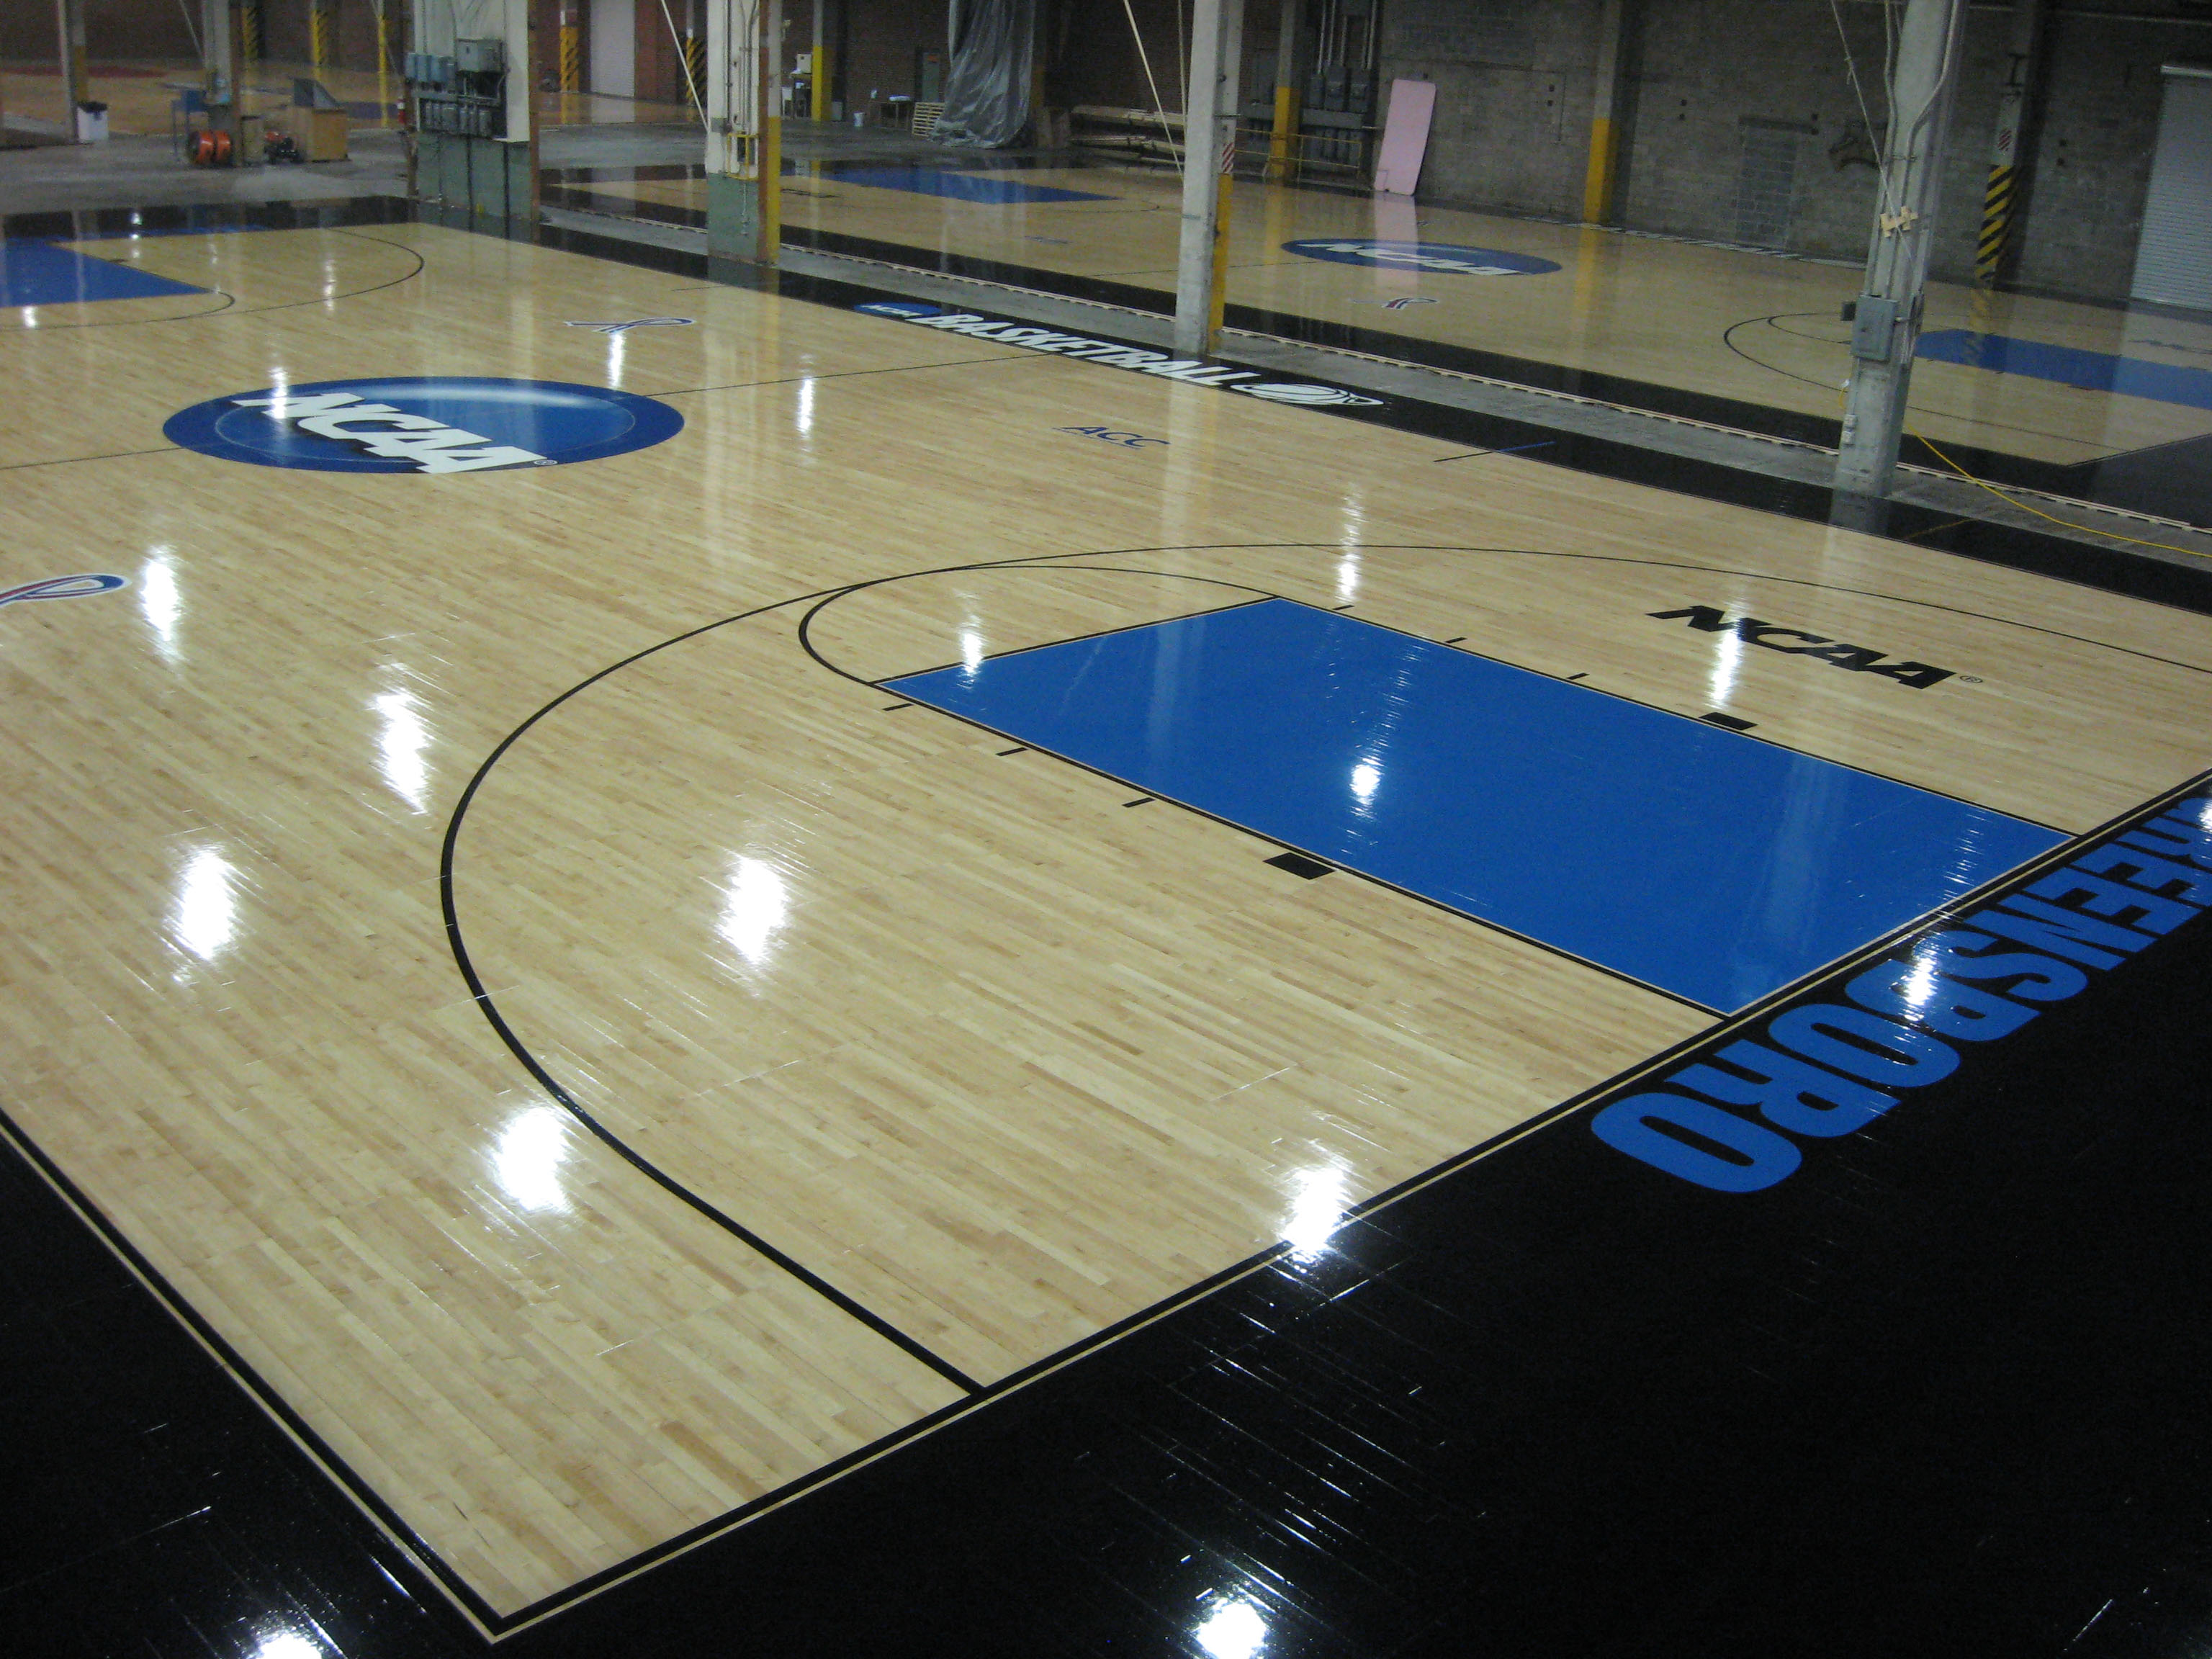 March Hoop Dreams Start in October at Michigan Plant